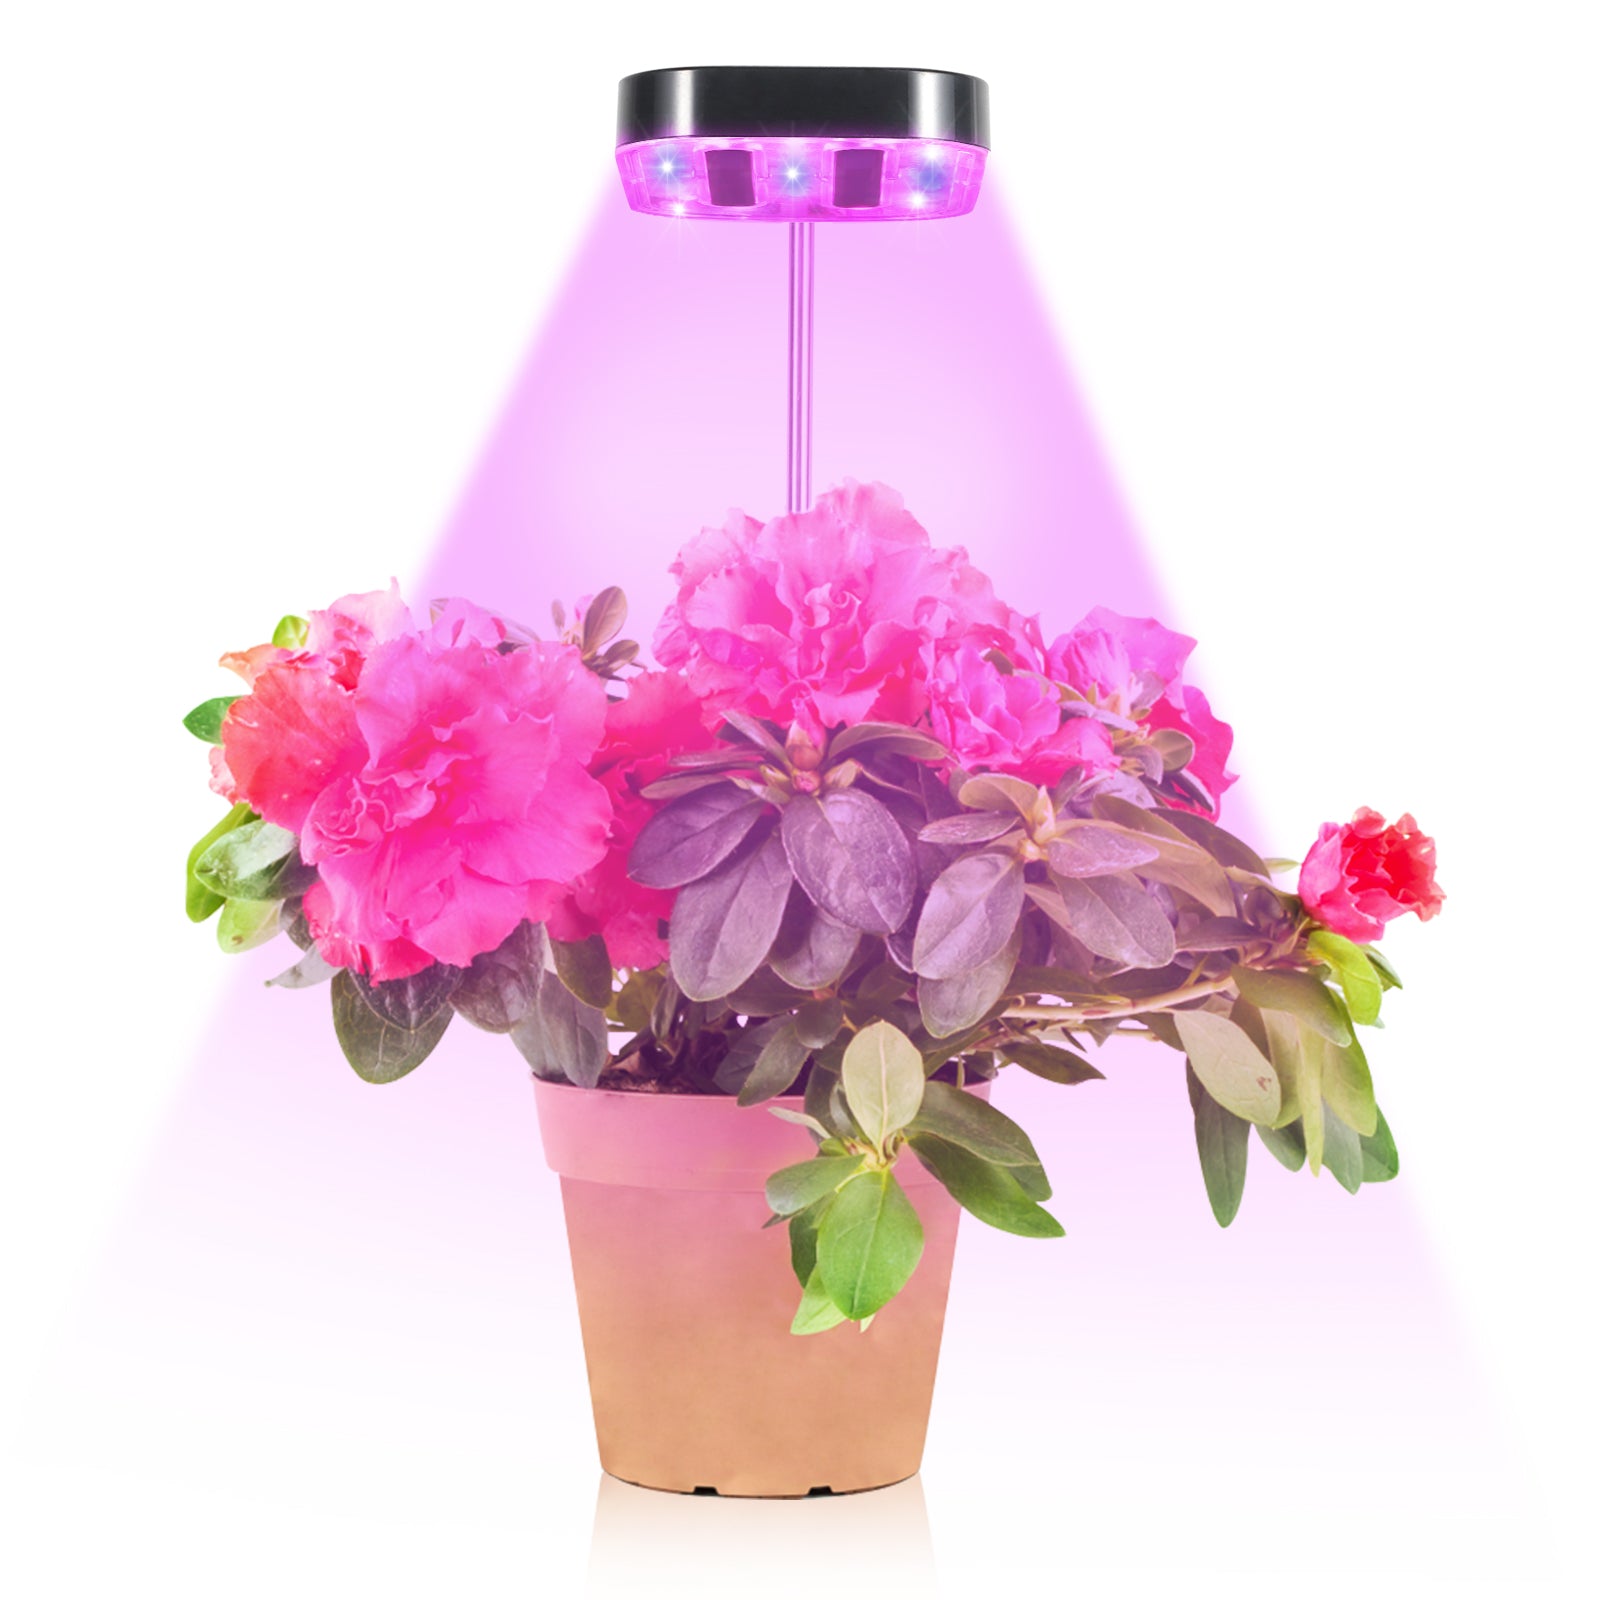 10W new plant fill light four-head plug plant light private model growth light succulent potted plant light 的副本